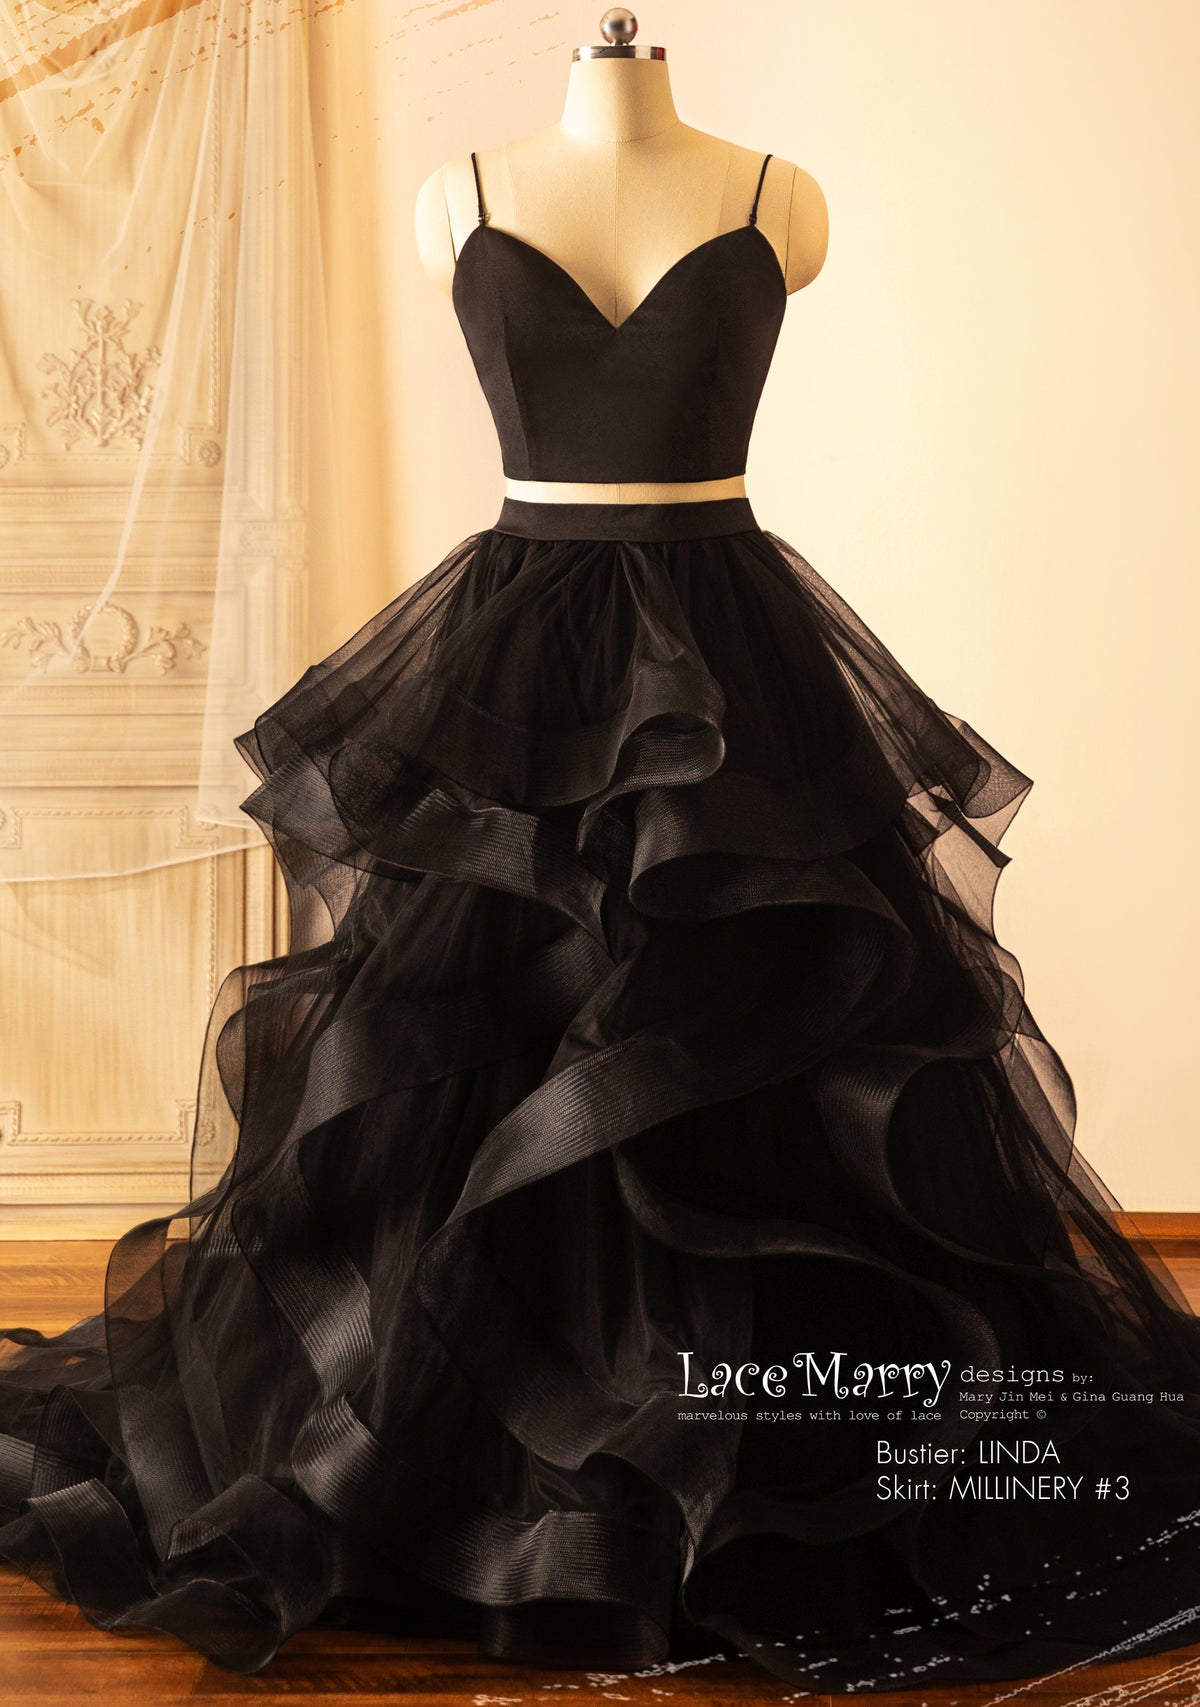 MILLINERY #3 / A Line Black Bridal Skirt with Multiple Layers